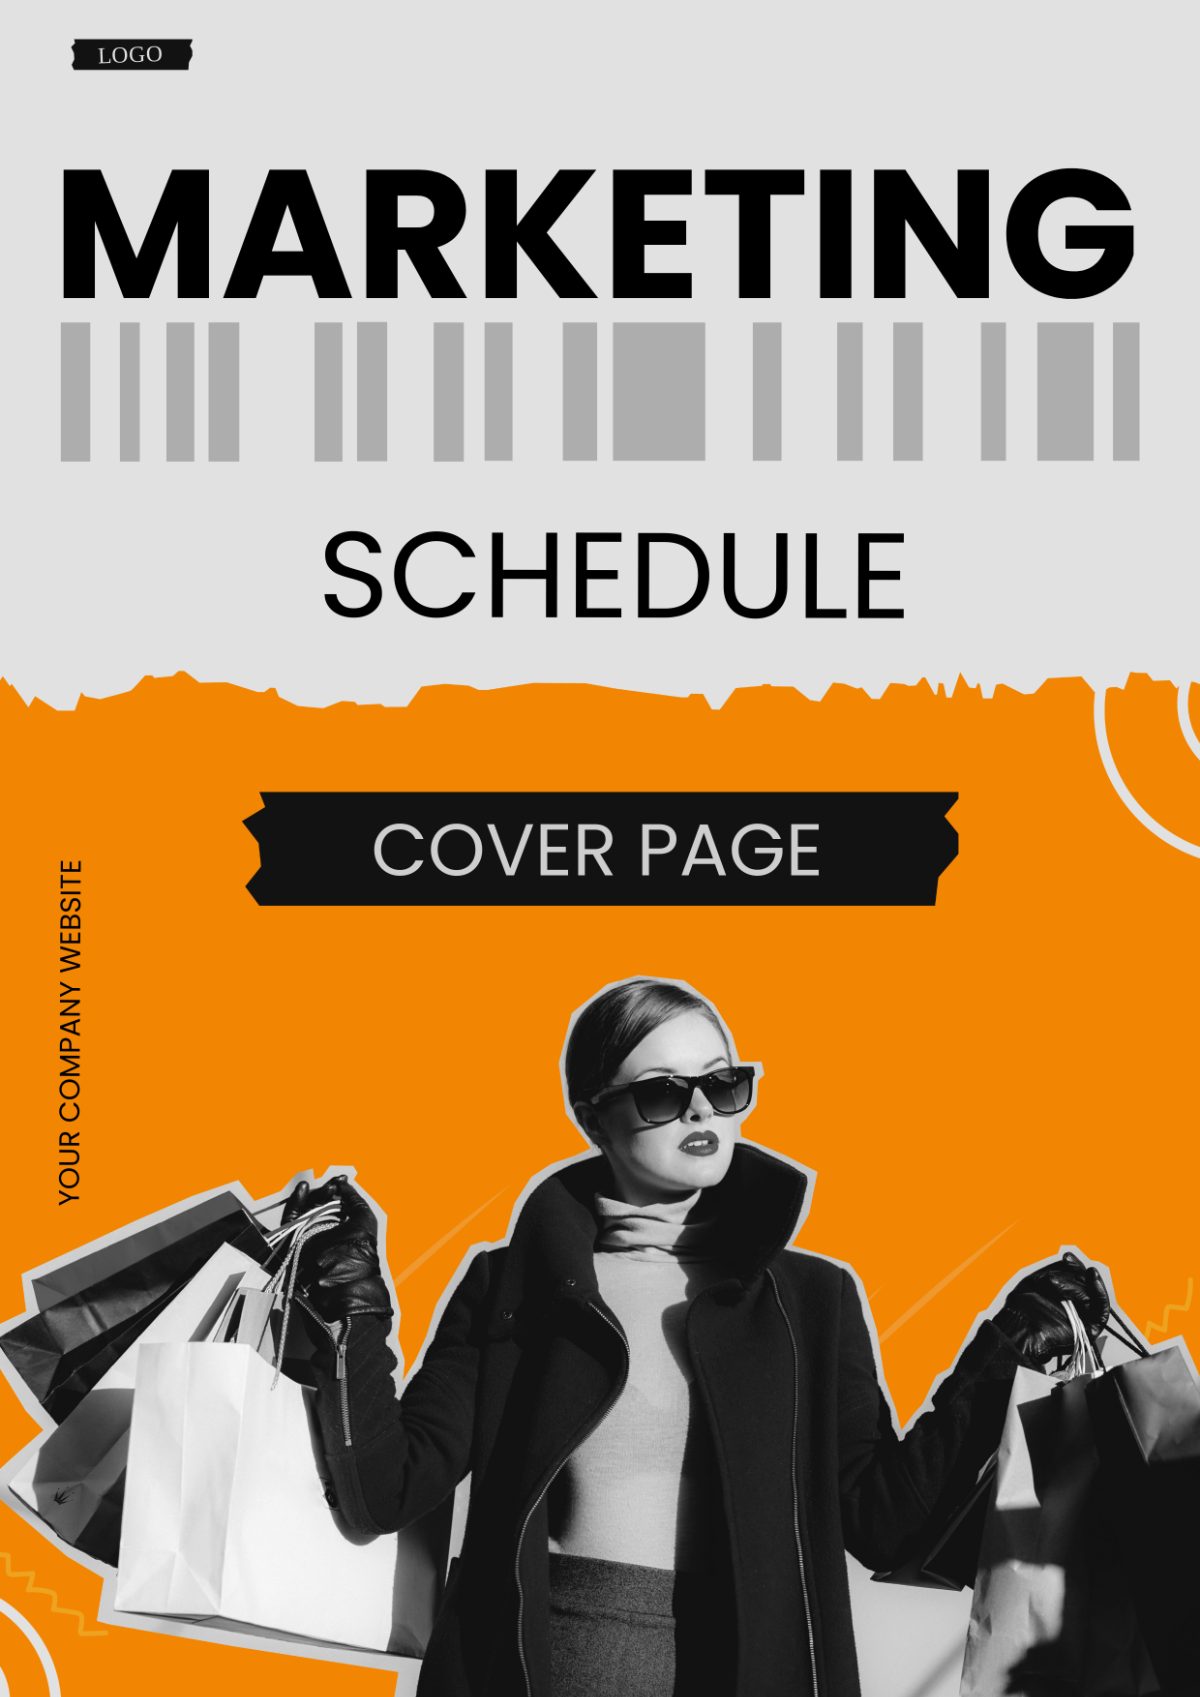 Marketing Schedule Cover Page